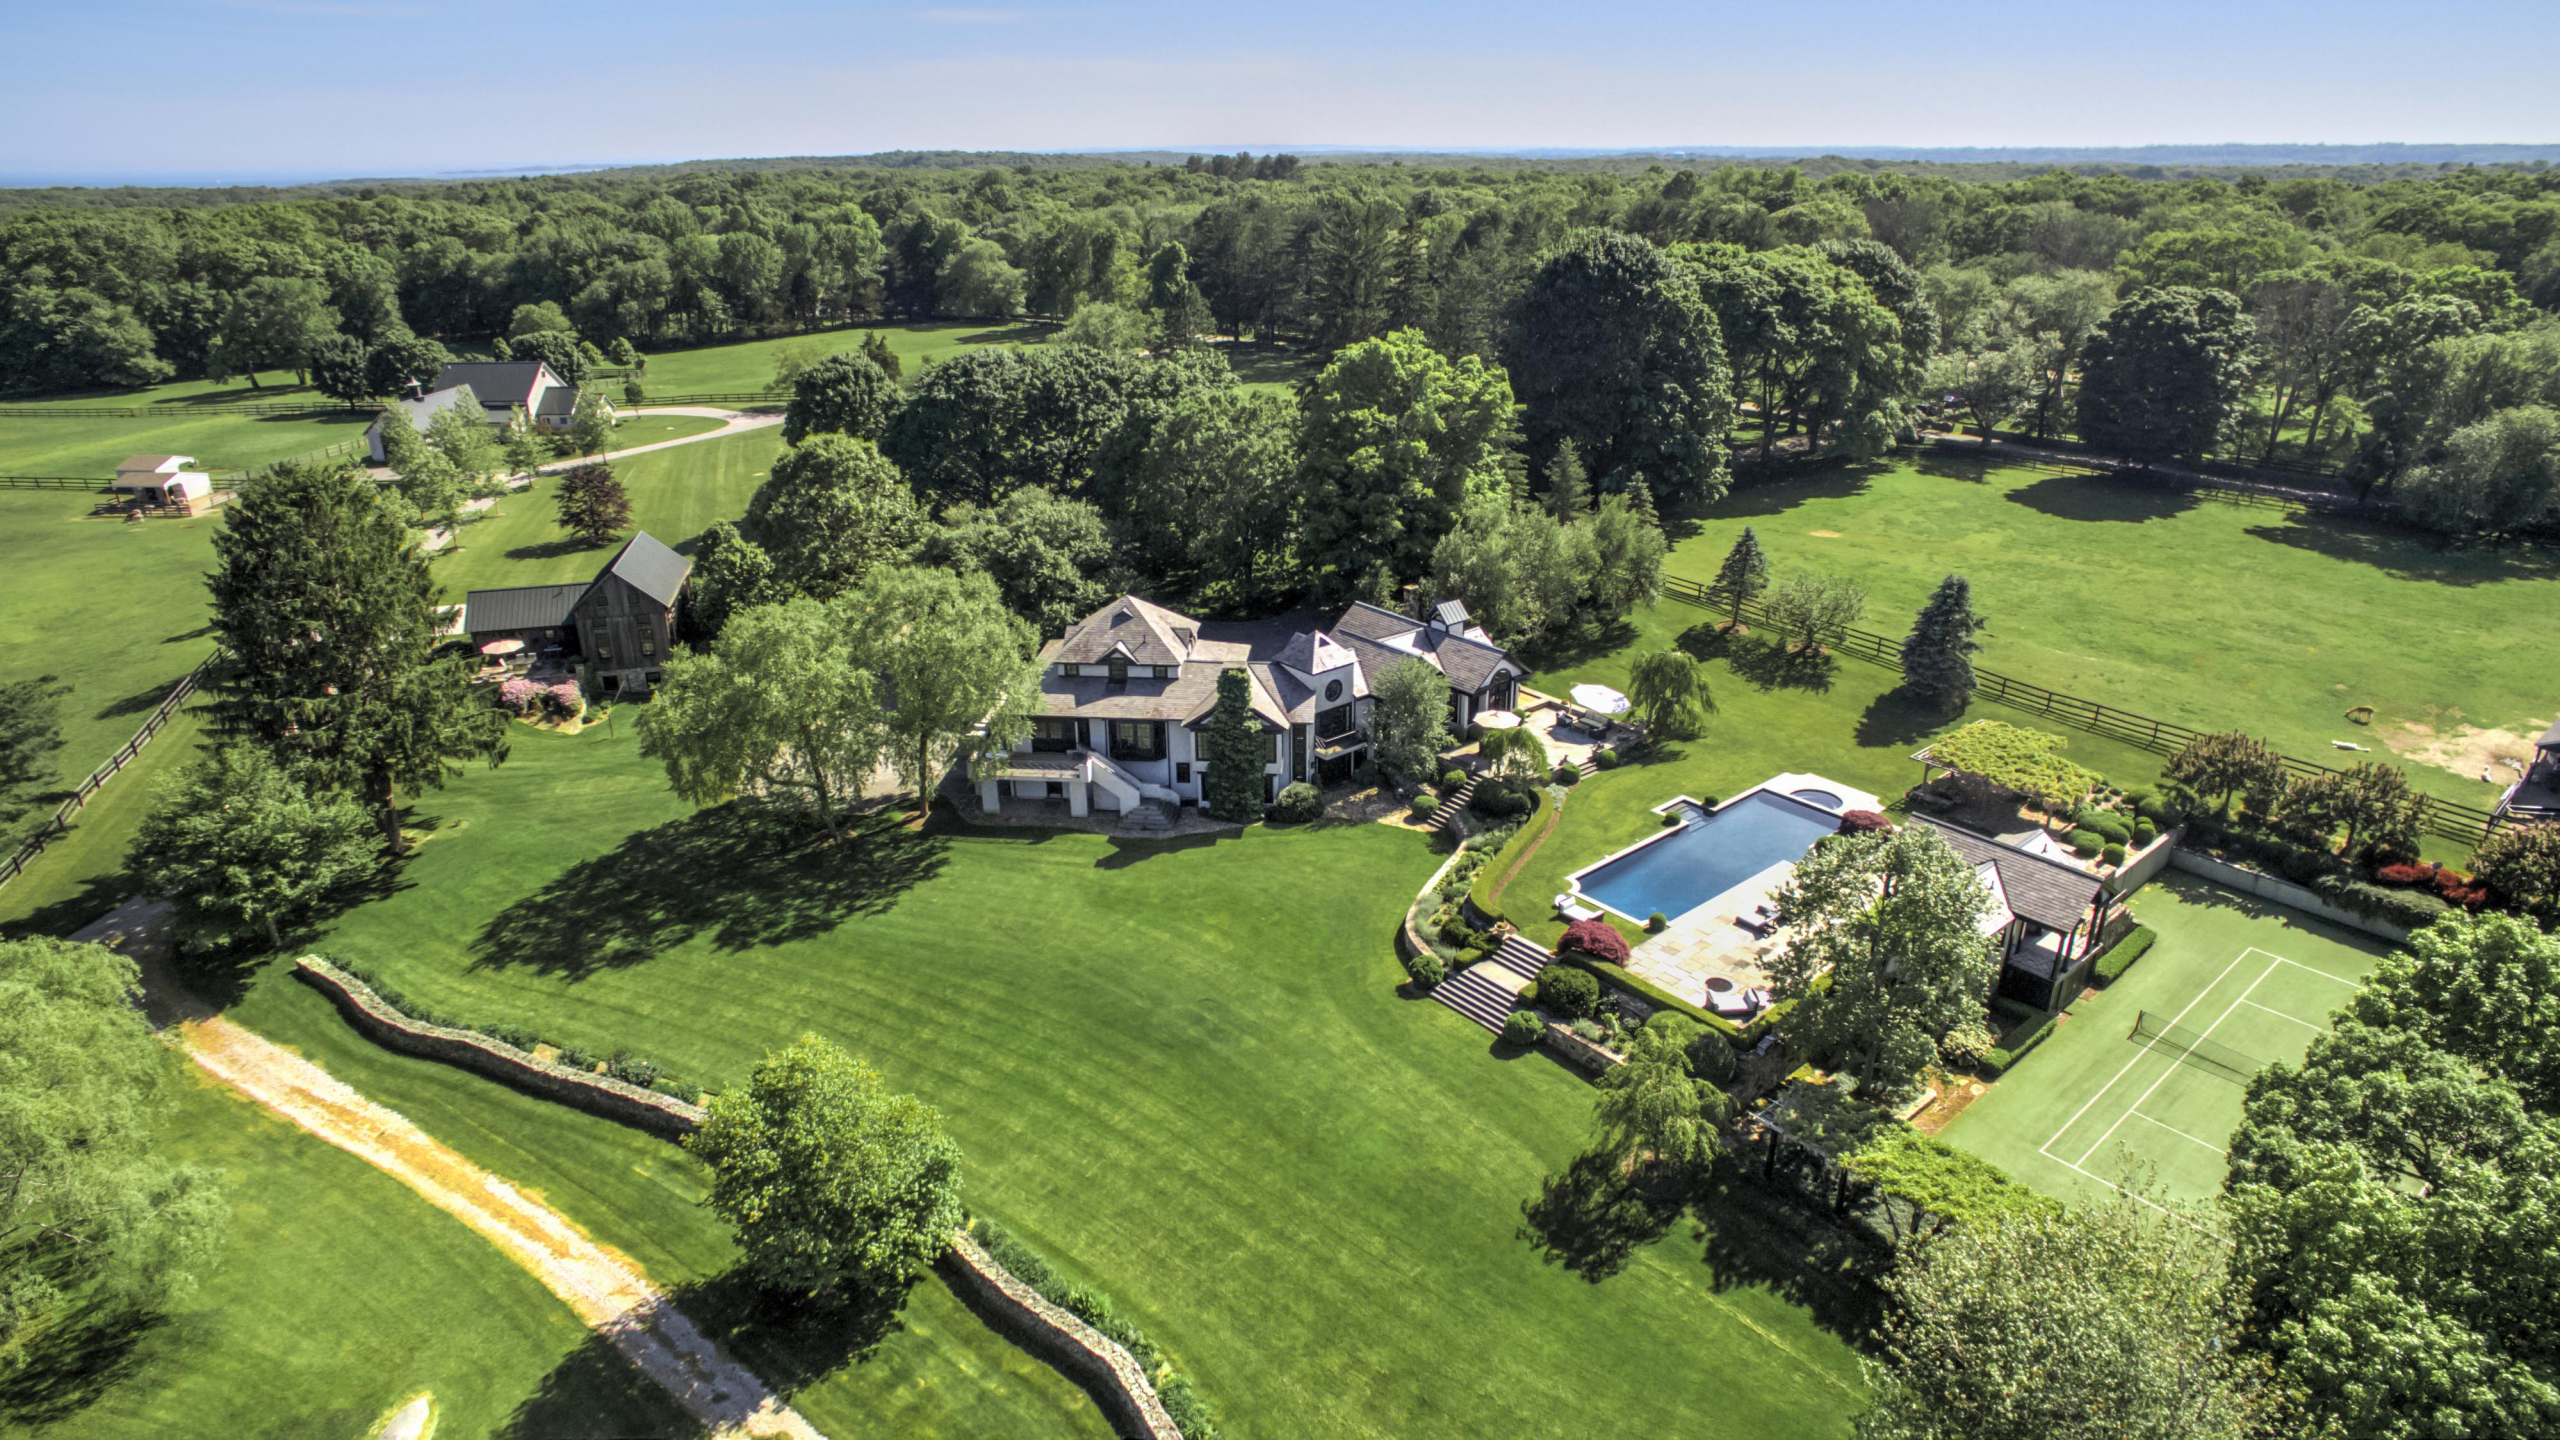 STONINGTON LUXURY EQUESTRIAN COMPOUND & ADJACENT PROPERTIES SELL FOR COMBINED $3.123M WITH LARRY BURNS OF LILA DELMAN REAL ESTATE ON BOTH SIDES OF THE TRANSACTION